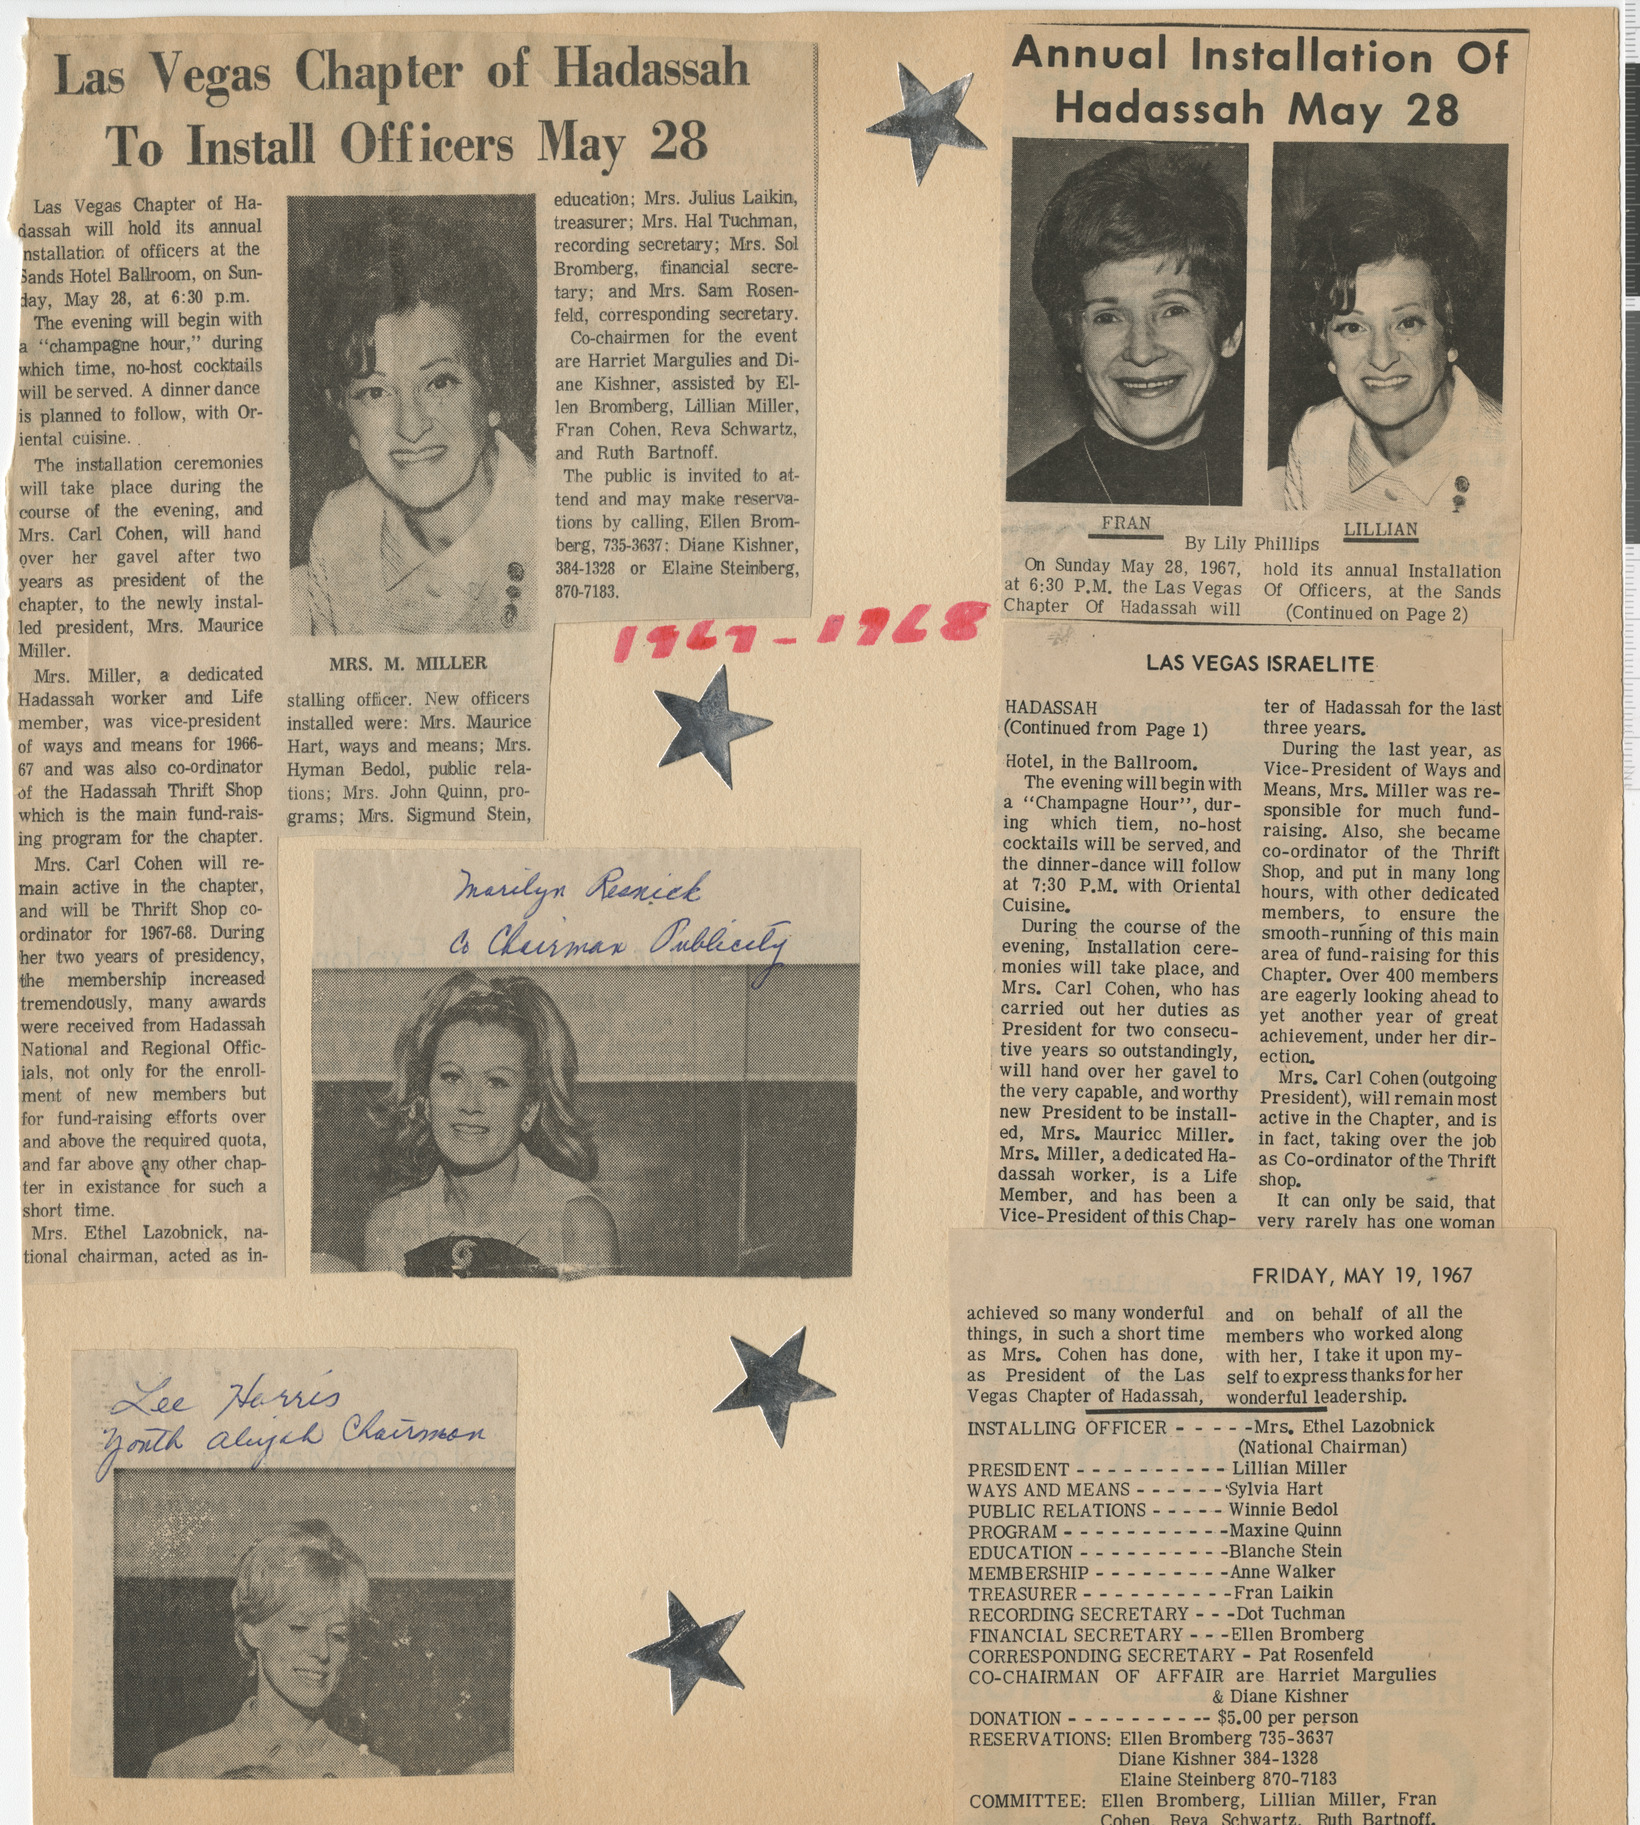 Newspaper clippings about installation of Hadassah Officers, May 1967